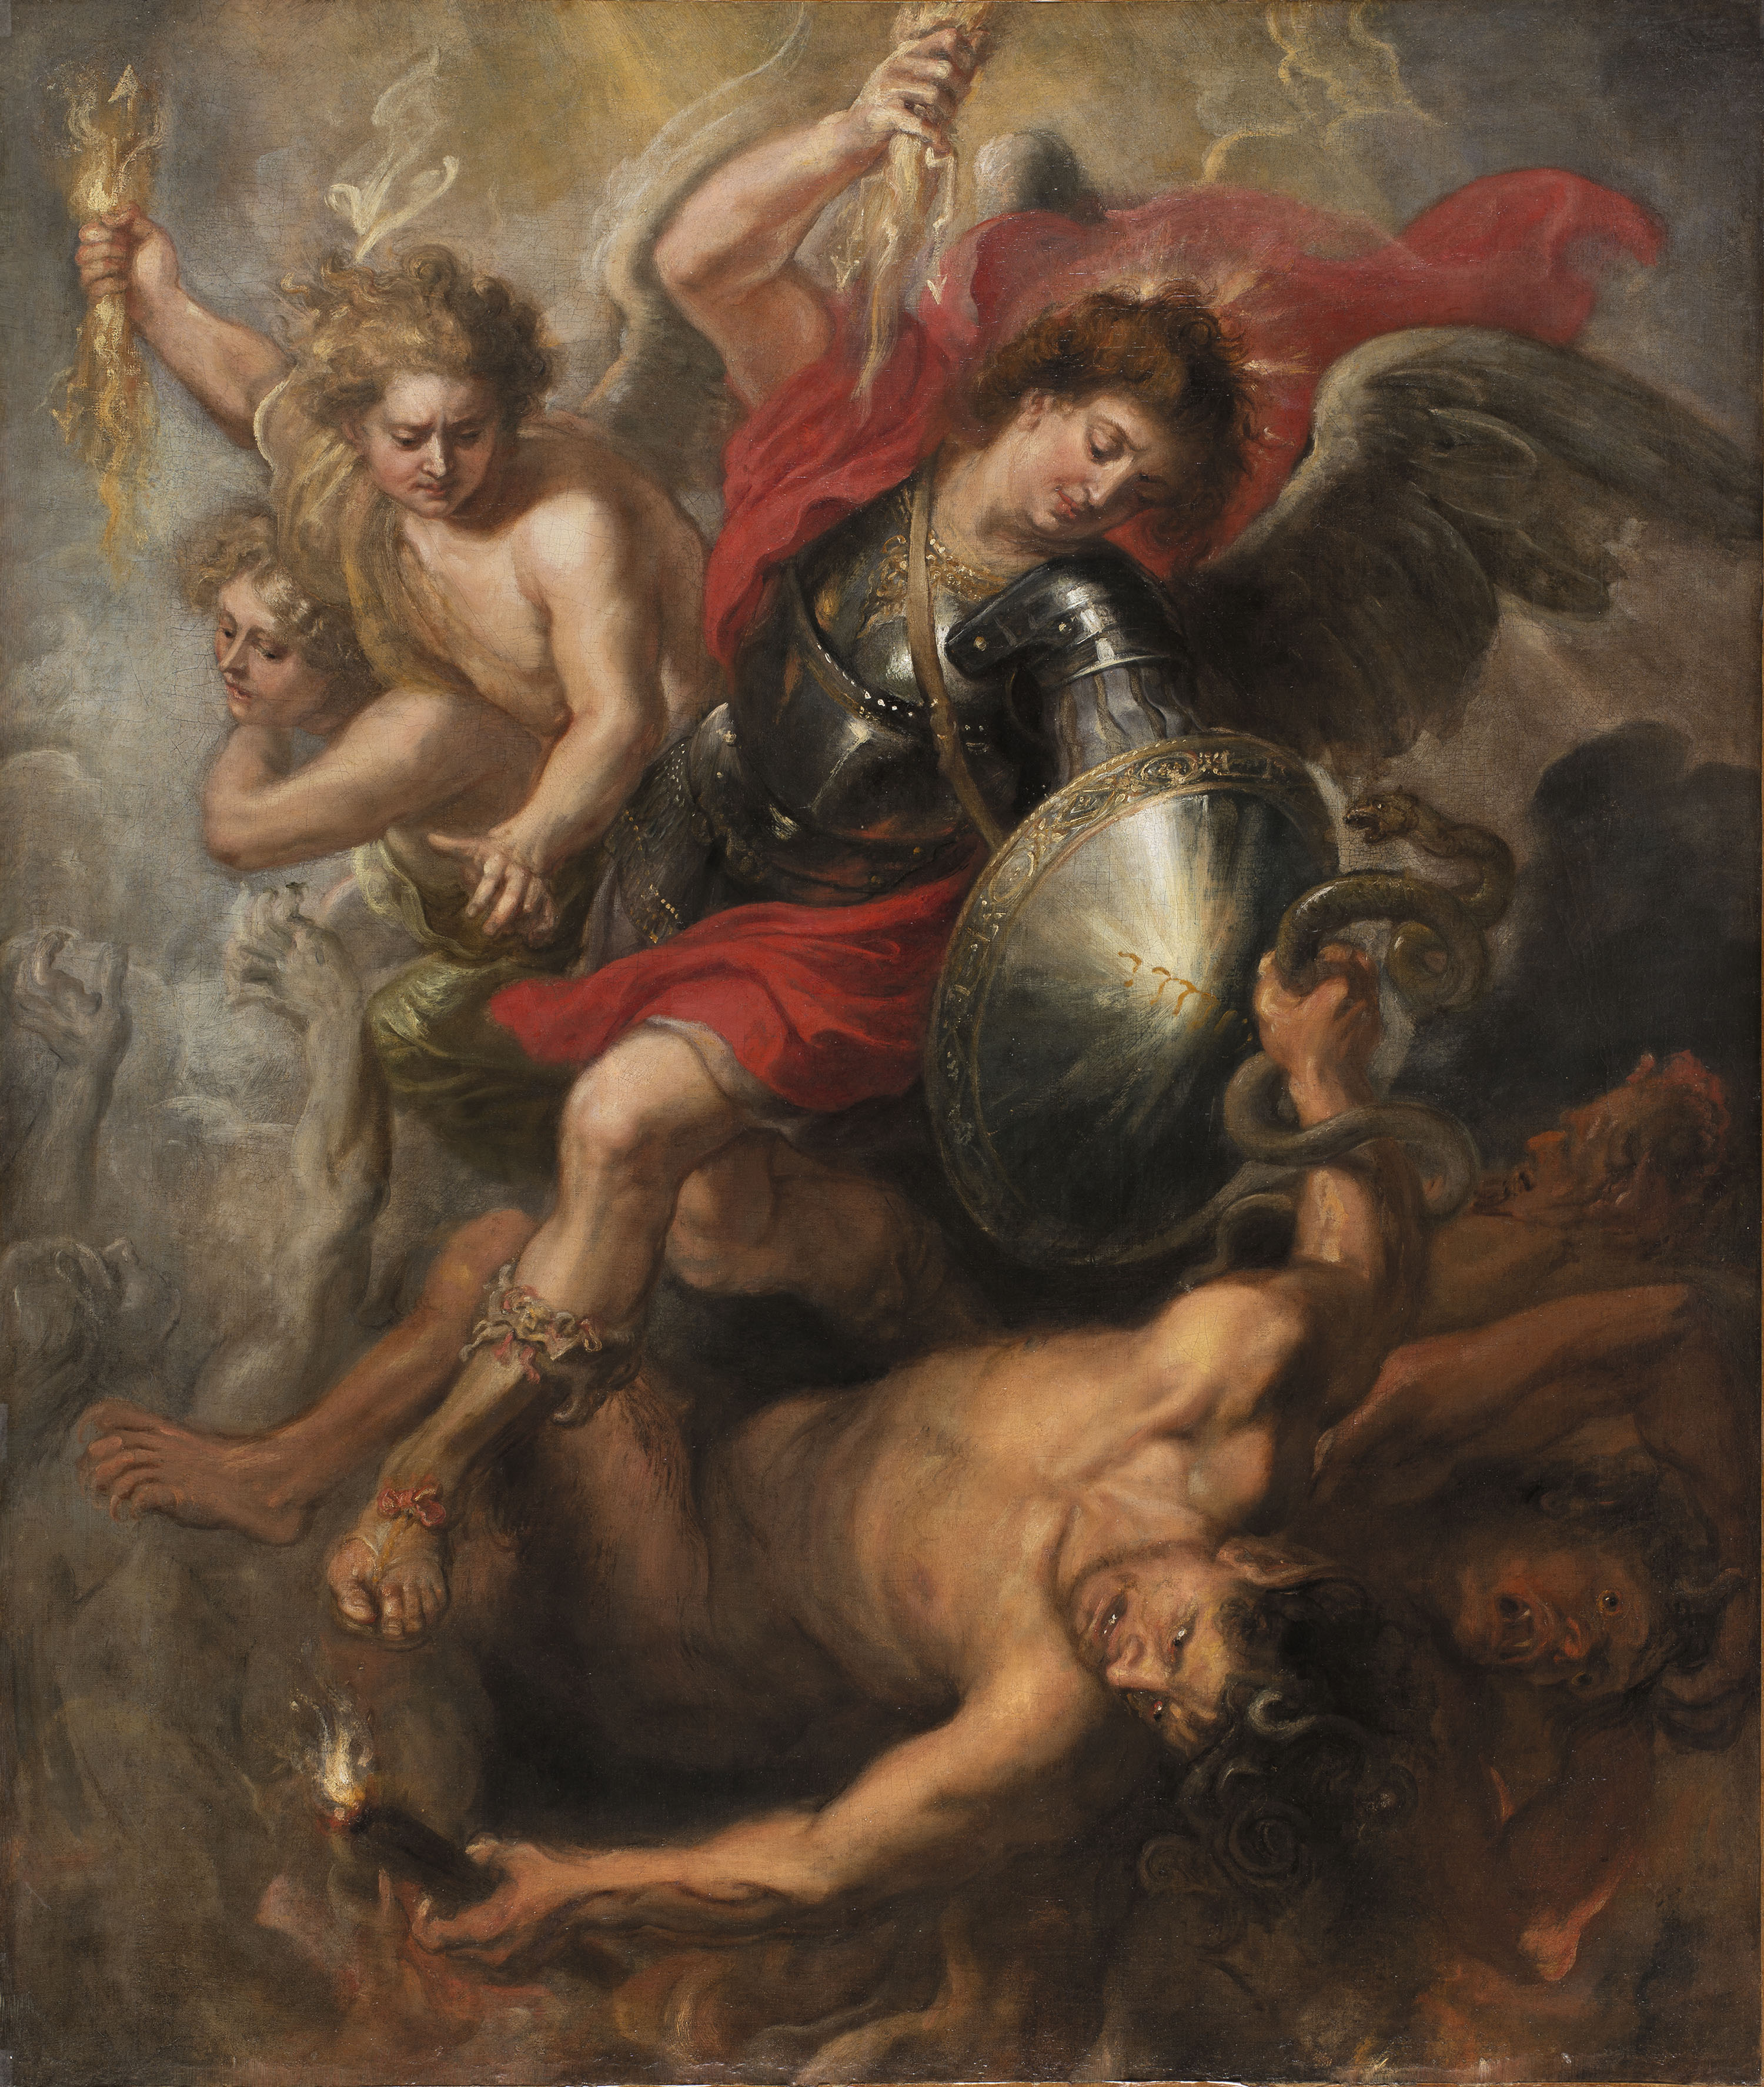 St. Michael expelling Lucifer and the Rebel Angels - Rubens, Peter